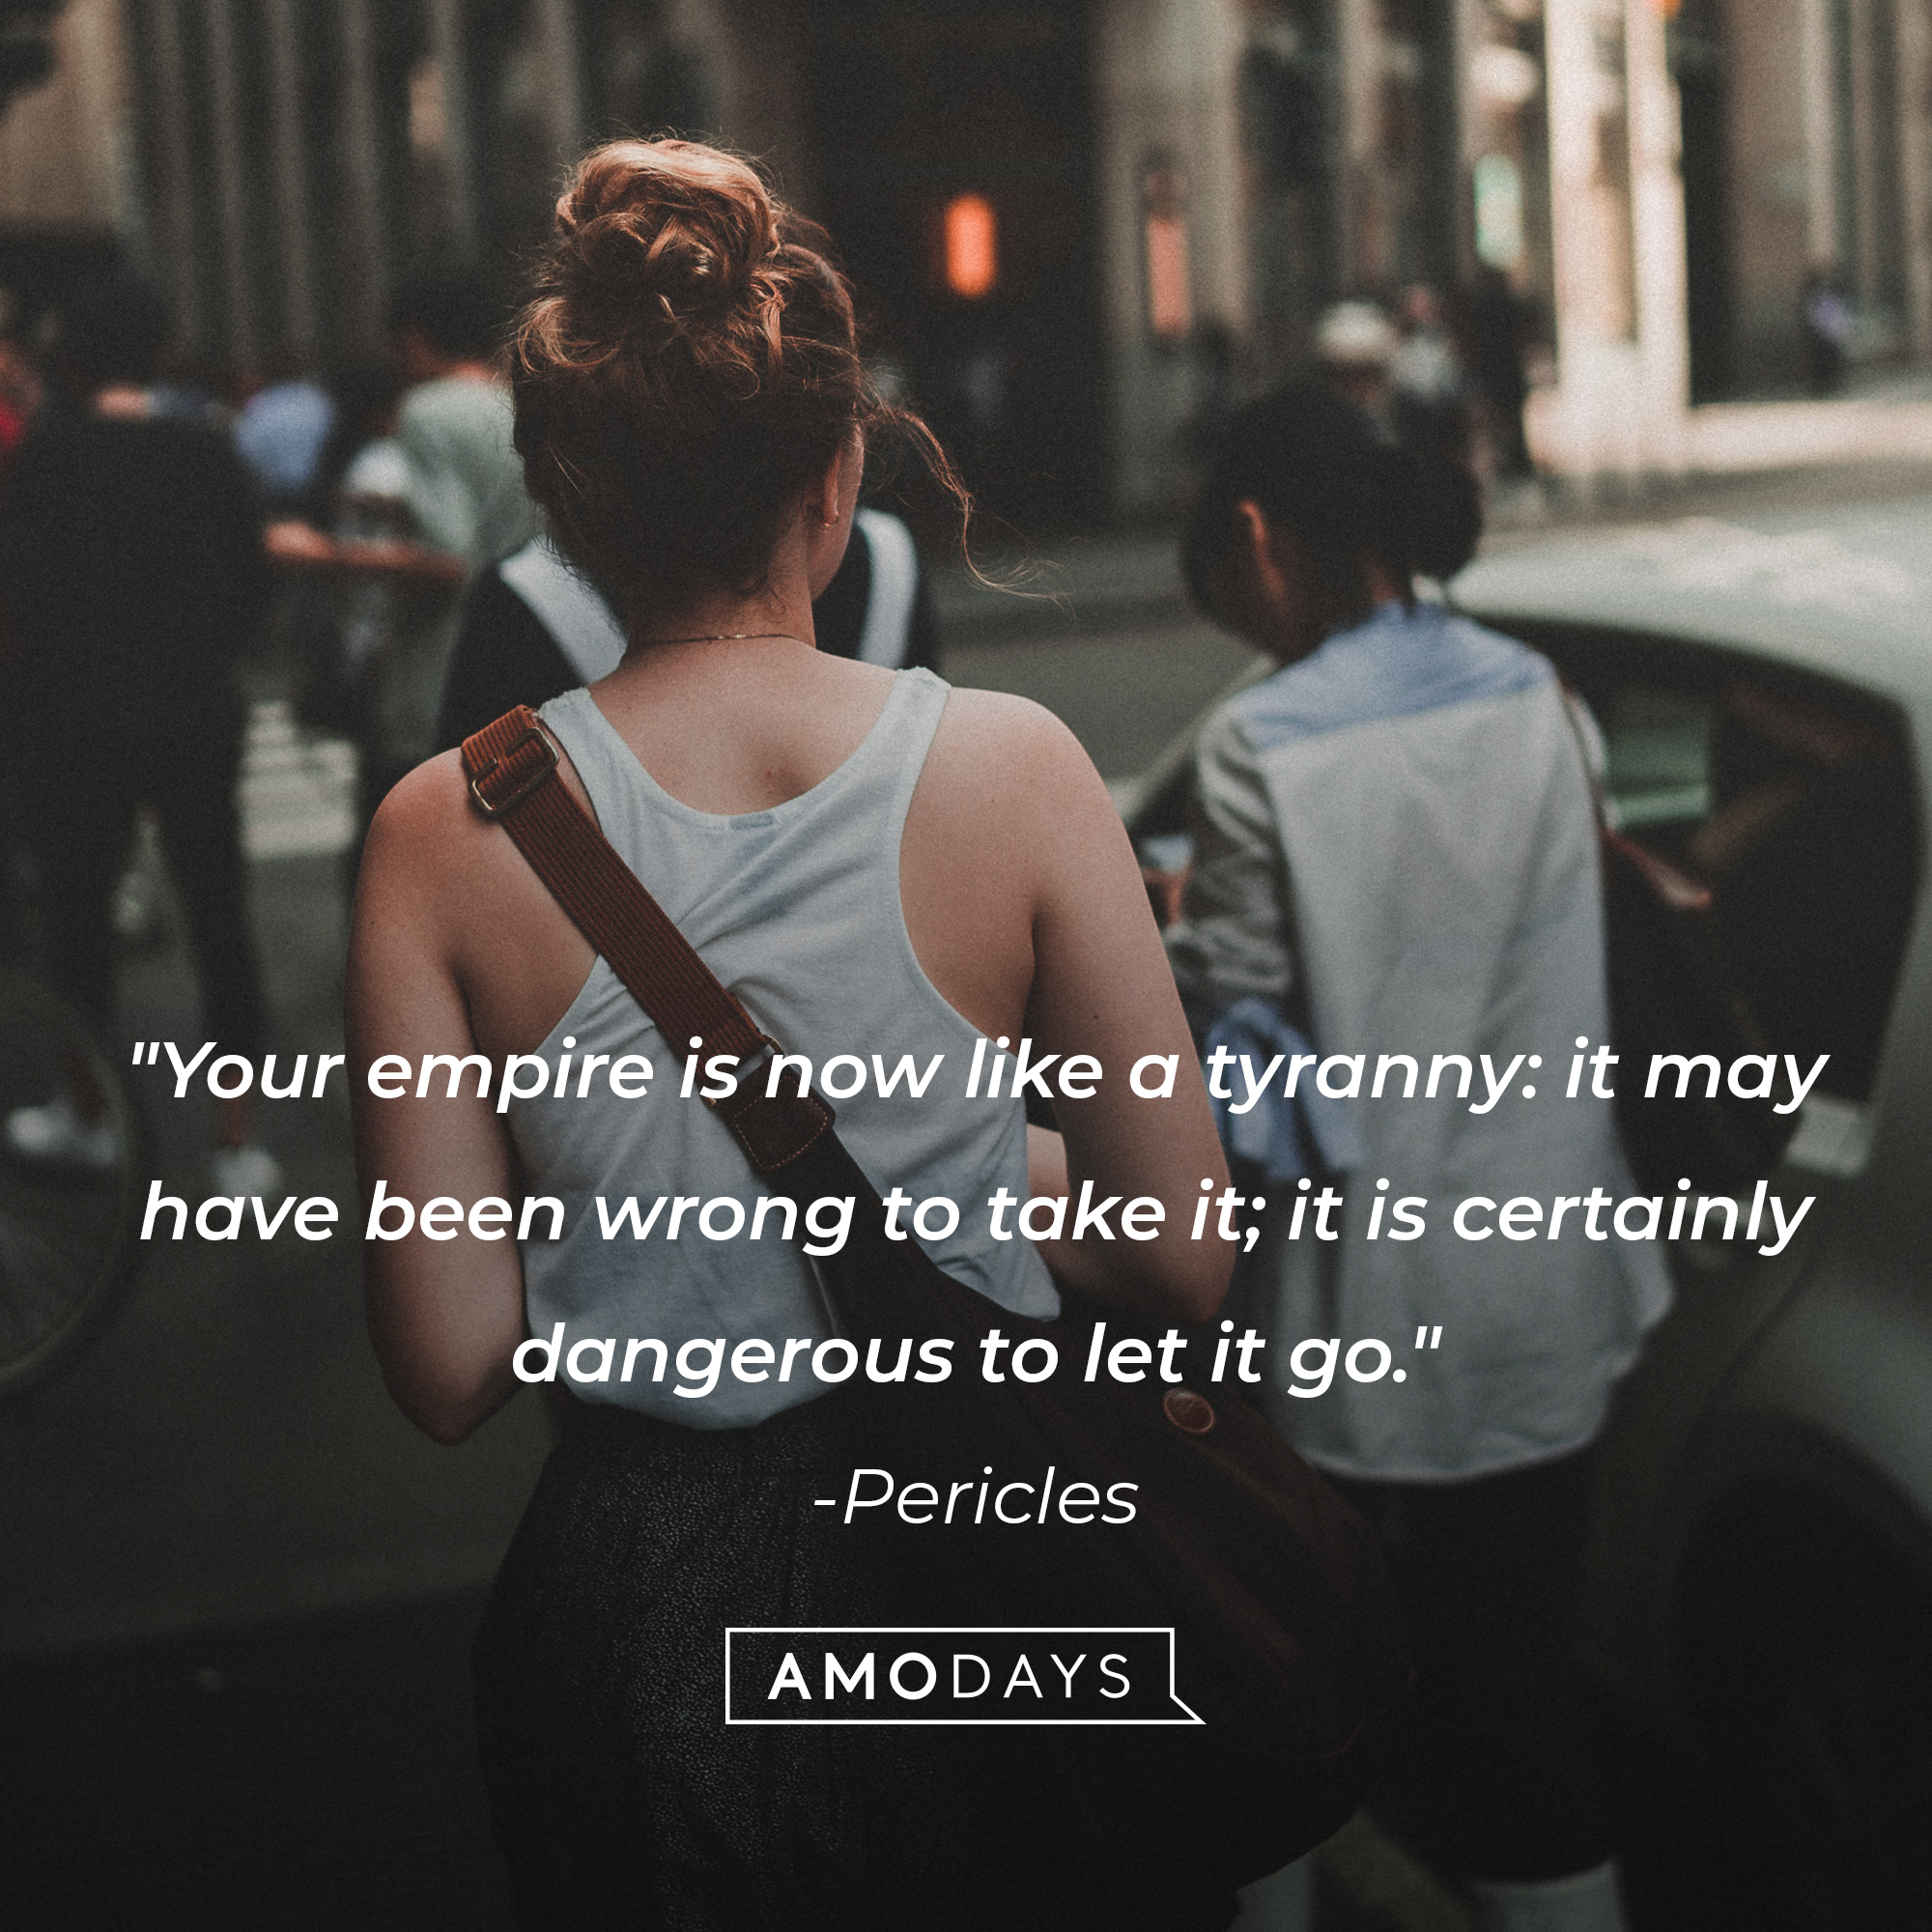 Pericles' quote: "Your empire is now like a tyranny: it may have been wrong to take it; it is certainly dangerous to let it go." | Image: AmoDays